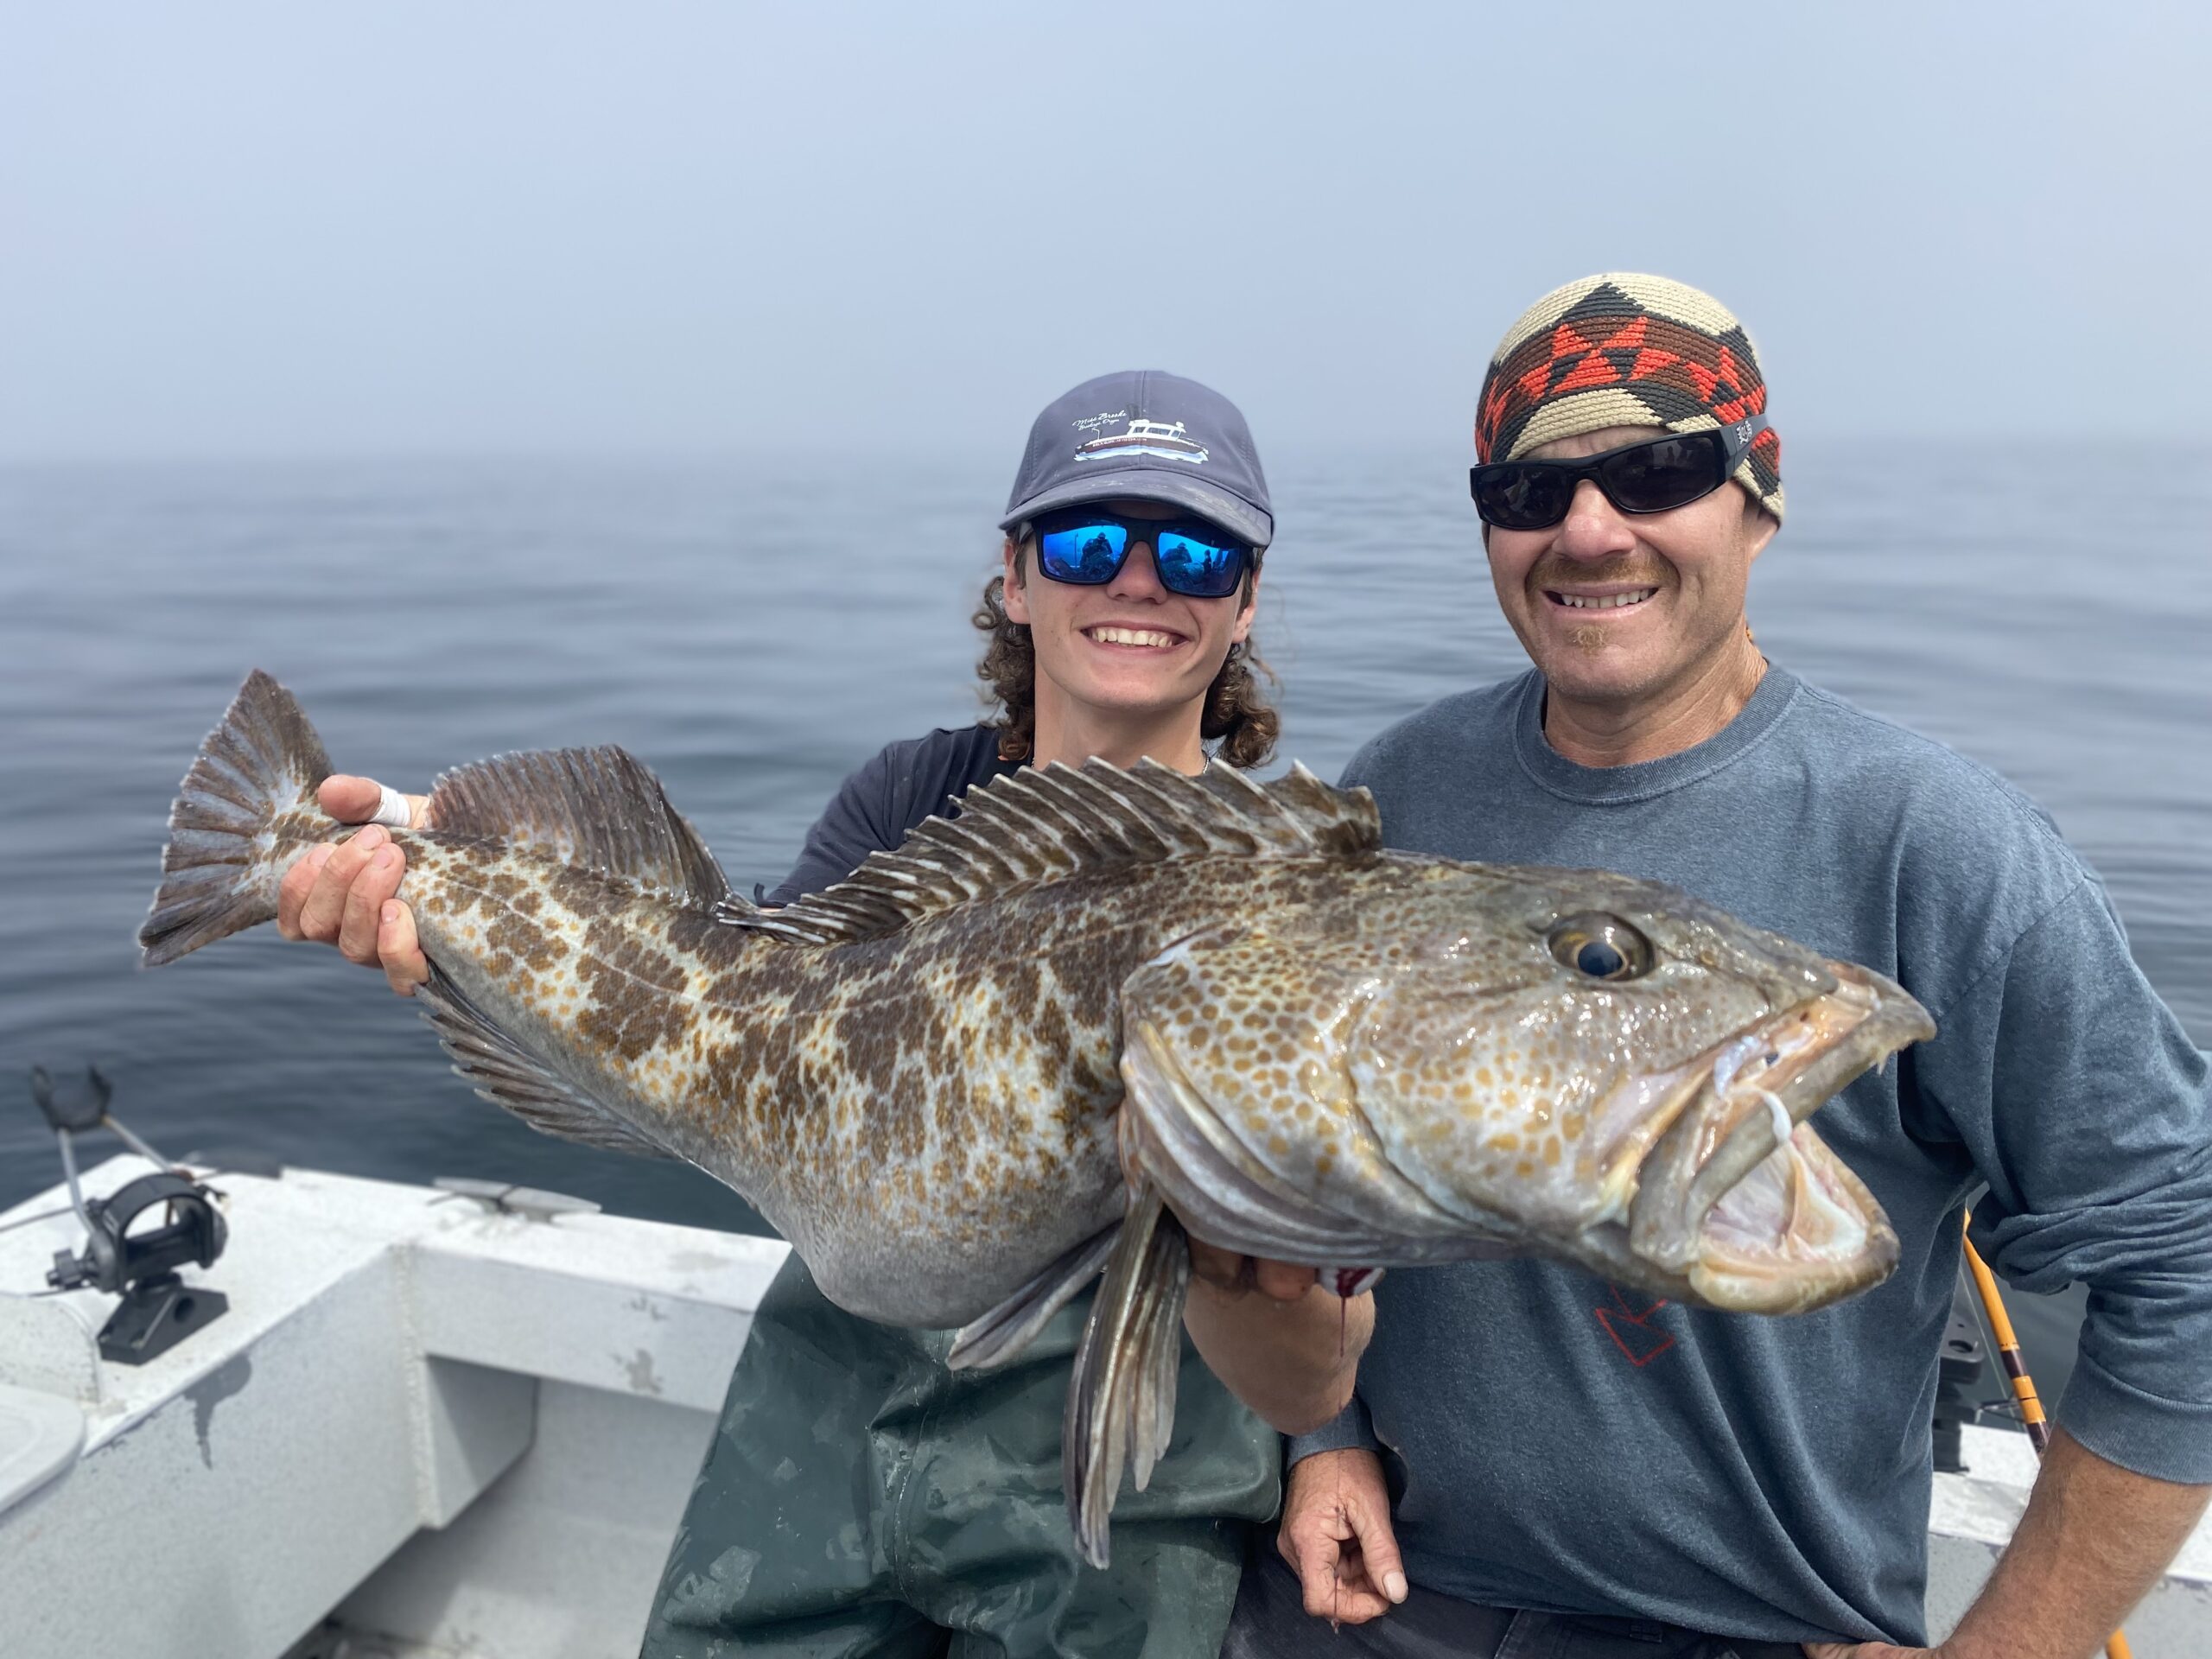 Lighthouse best bet for big lingcod, rockfish biting close to